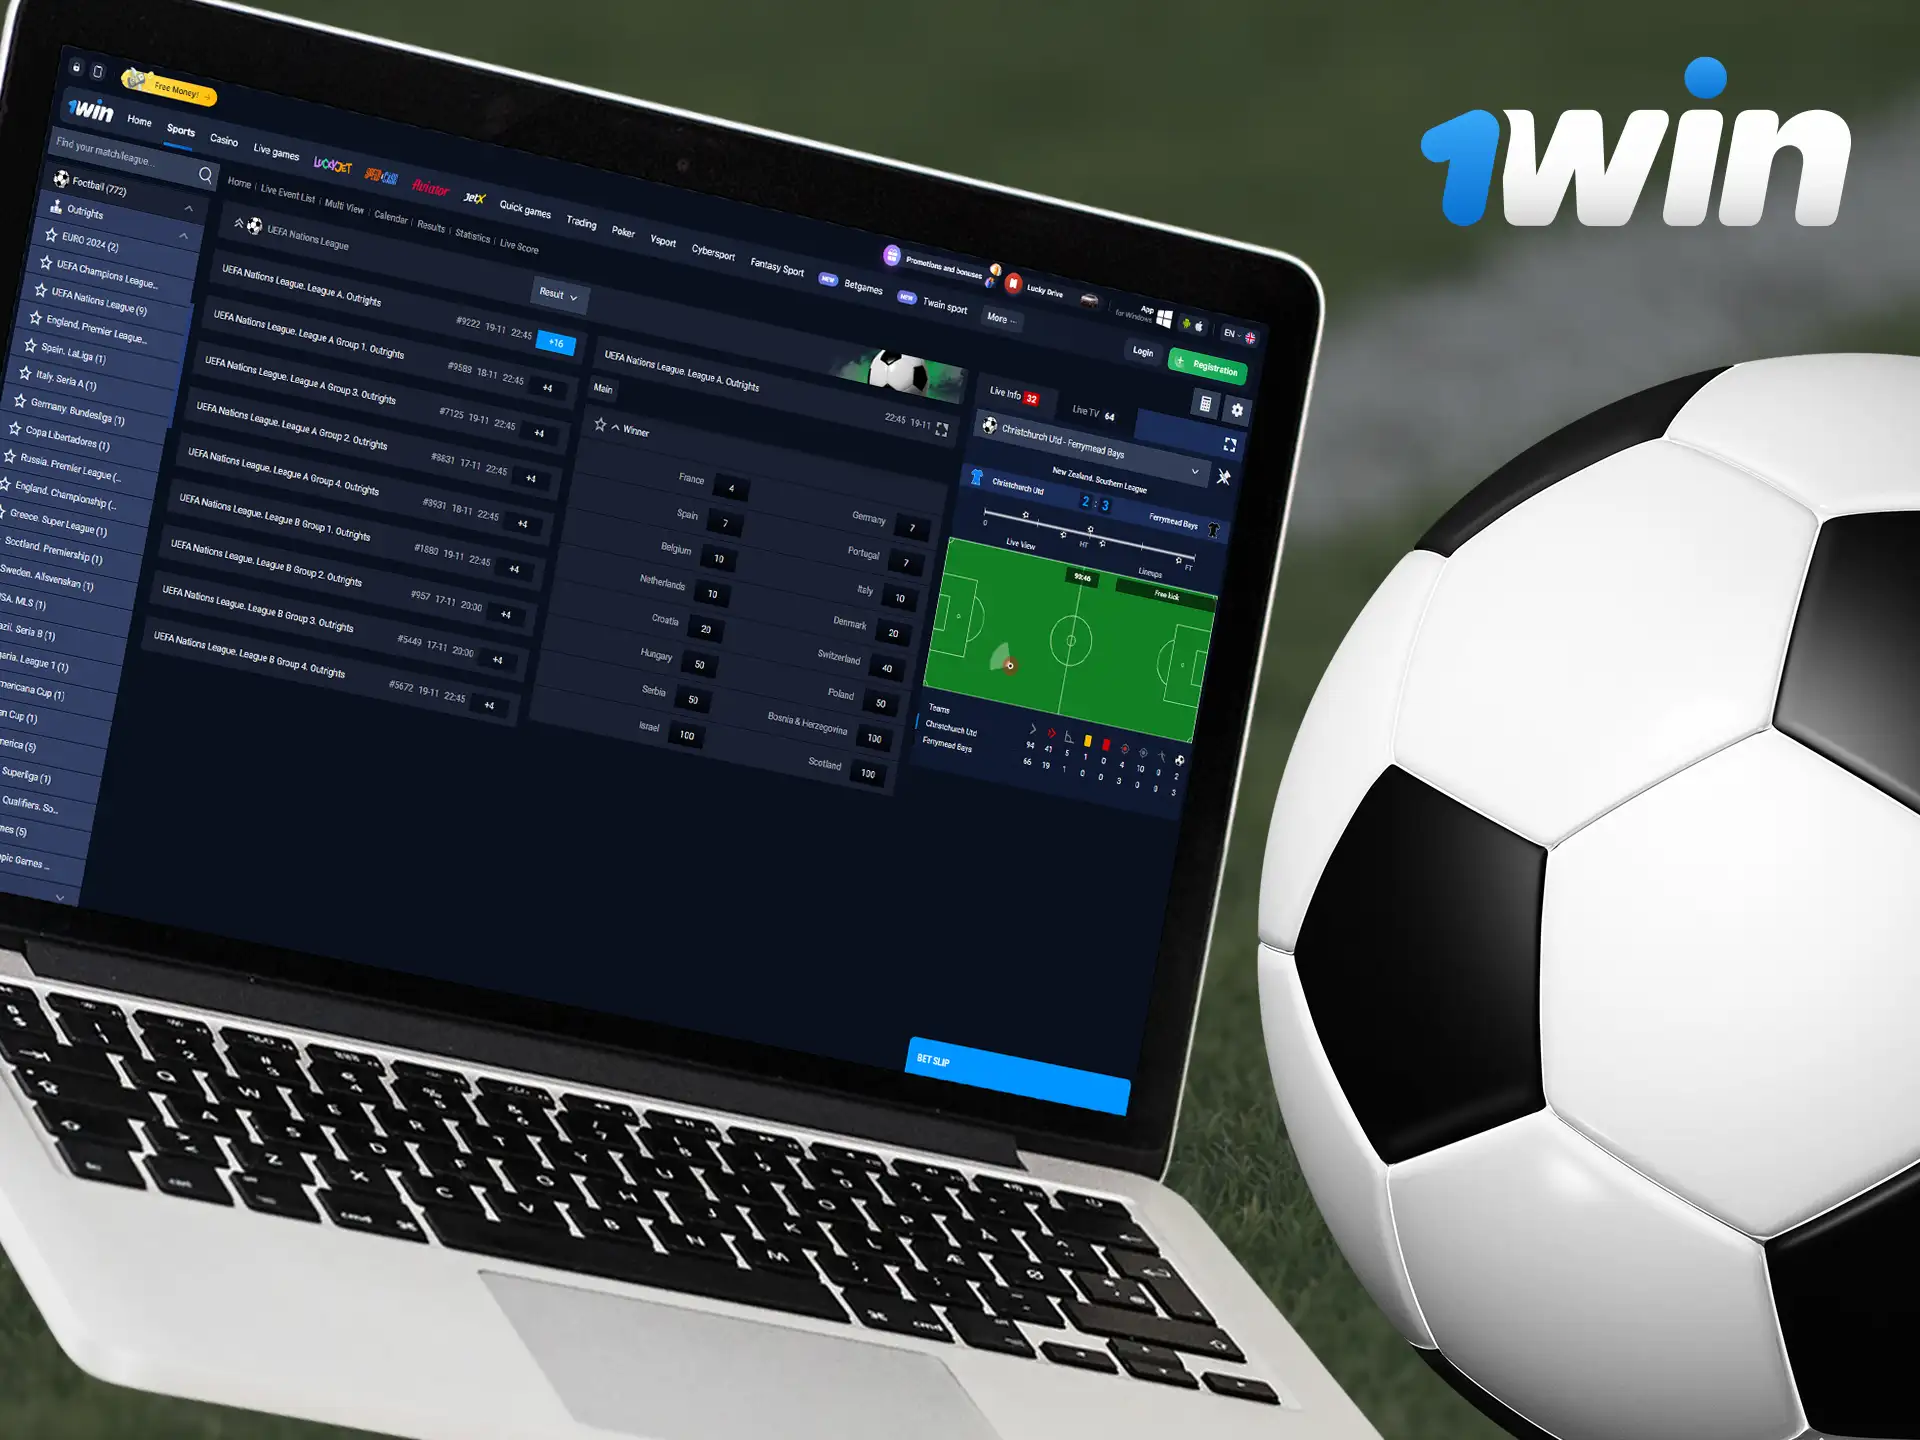 1Win provides a platform to follow a wide range of daily football events, including pre-match and live options.